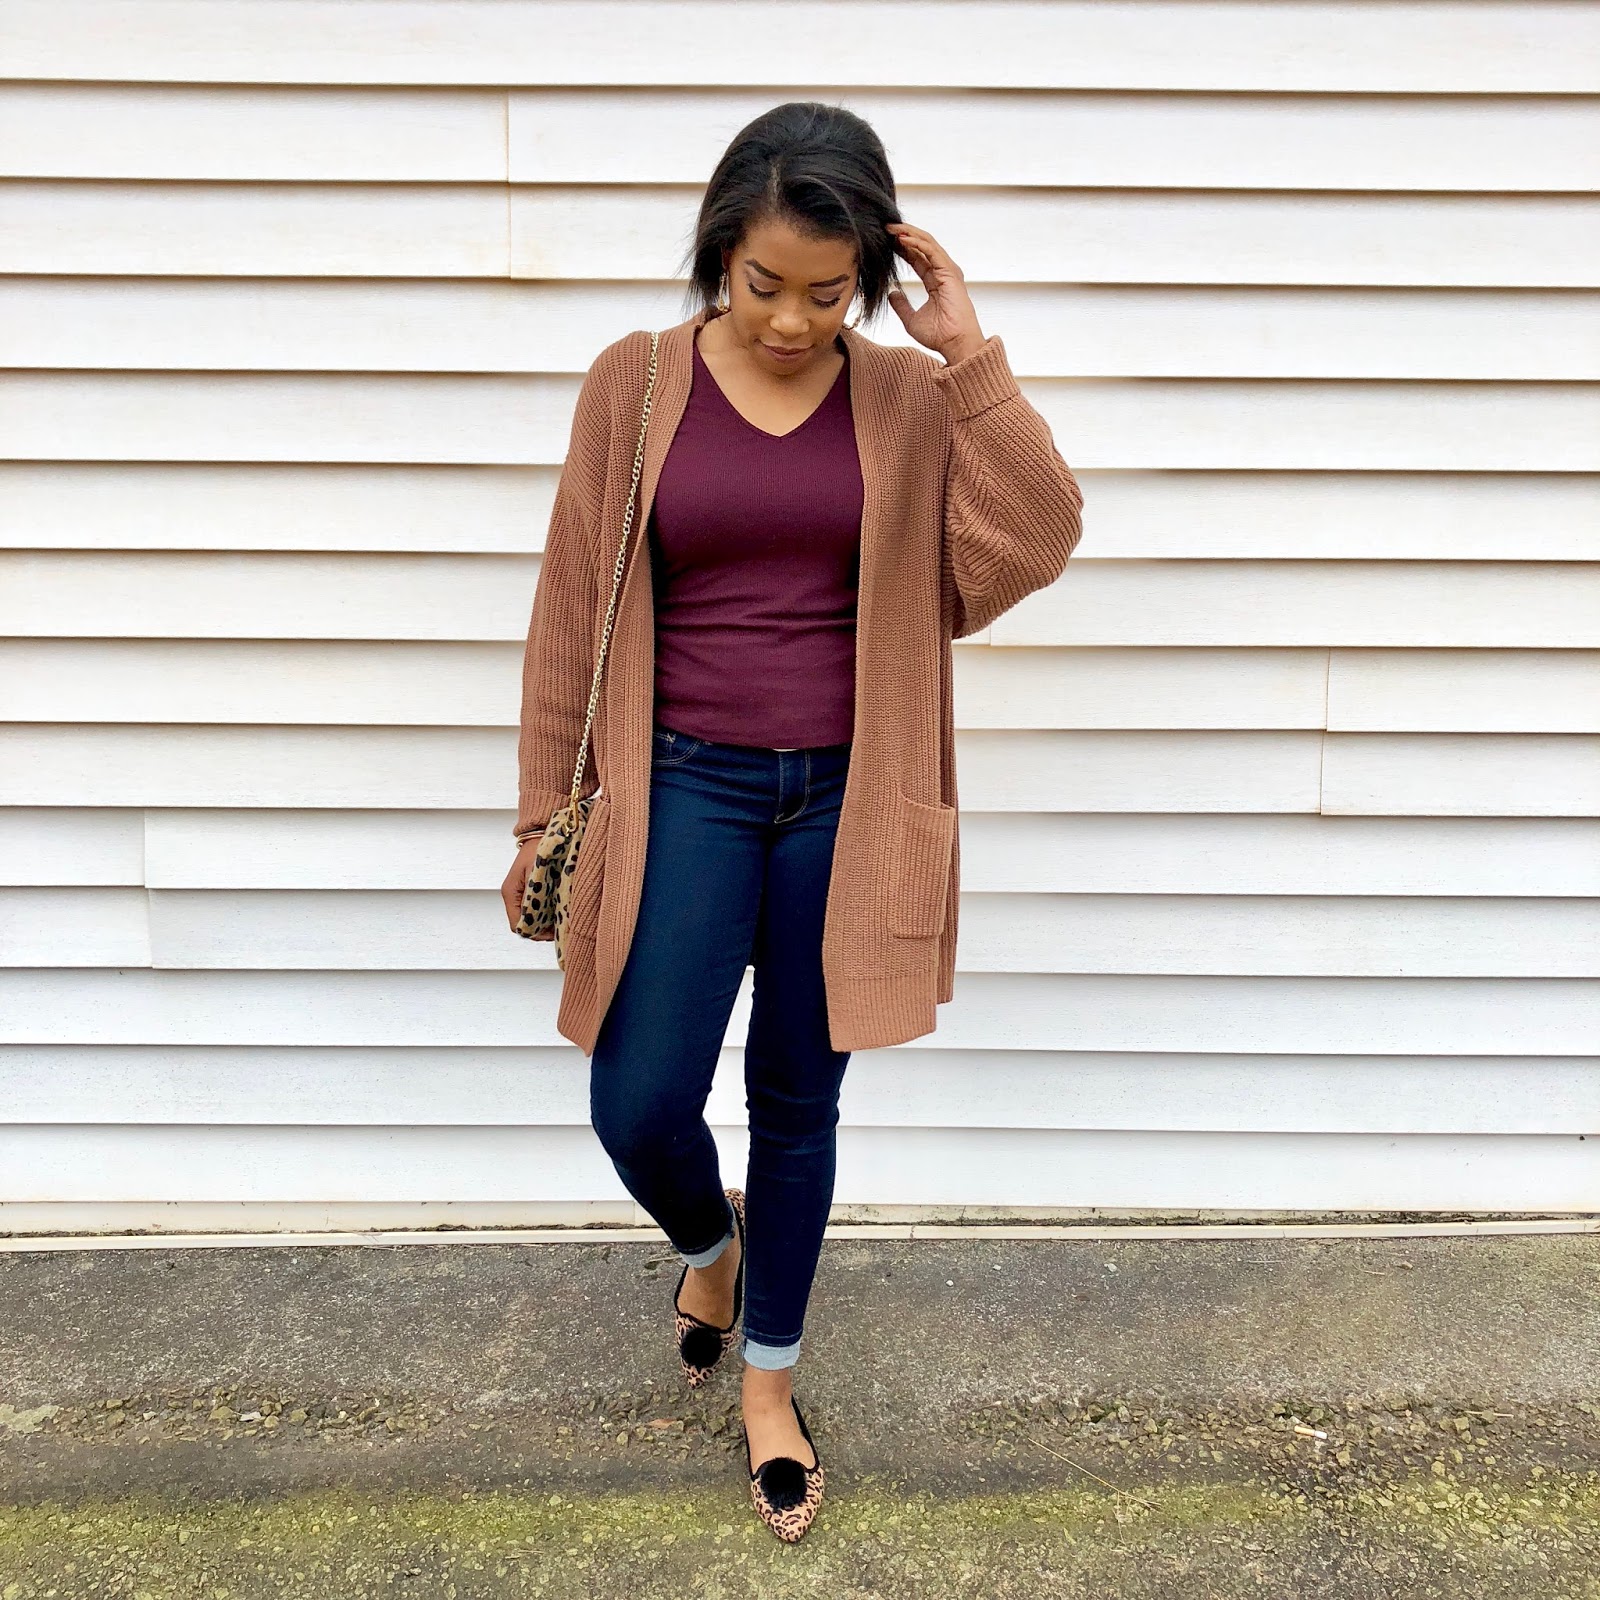 What To Wear With A Brown Cardigan?